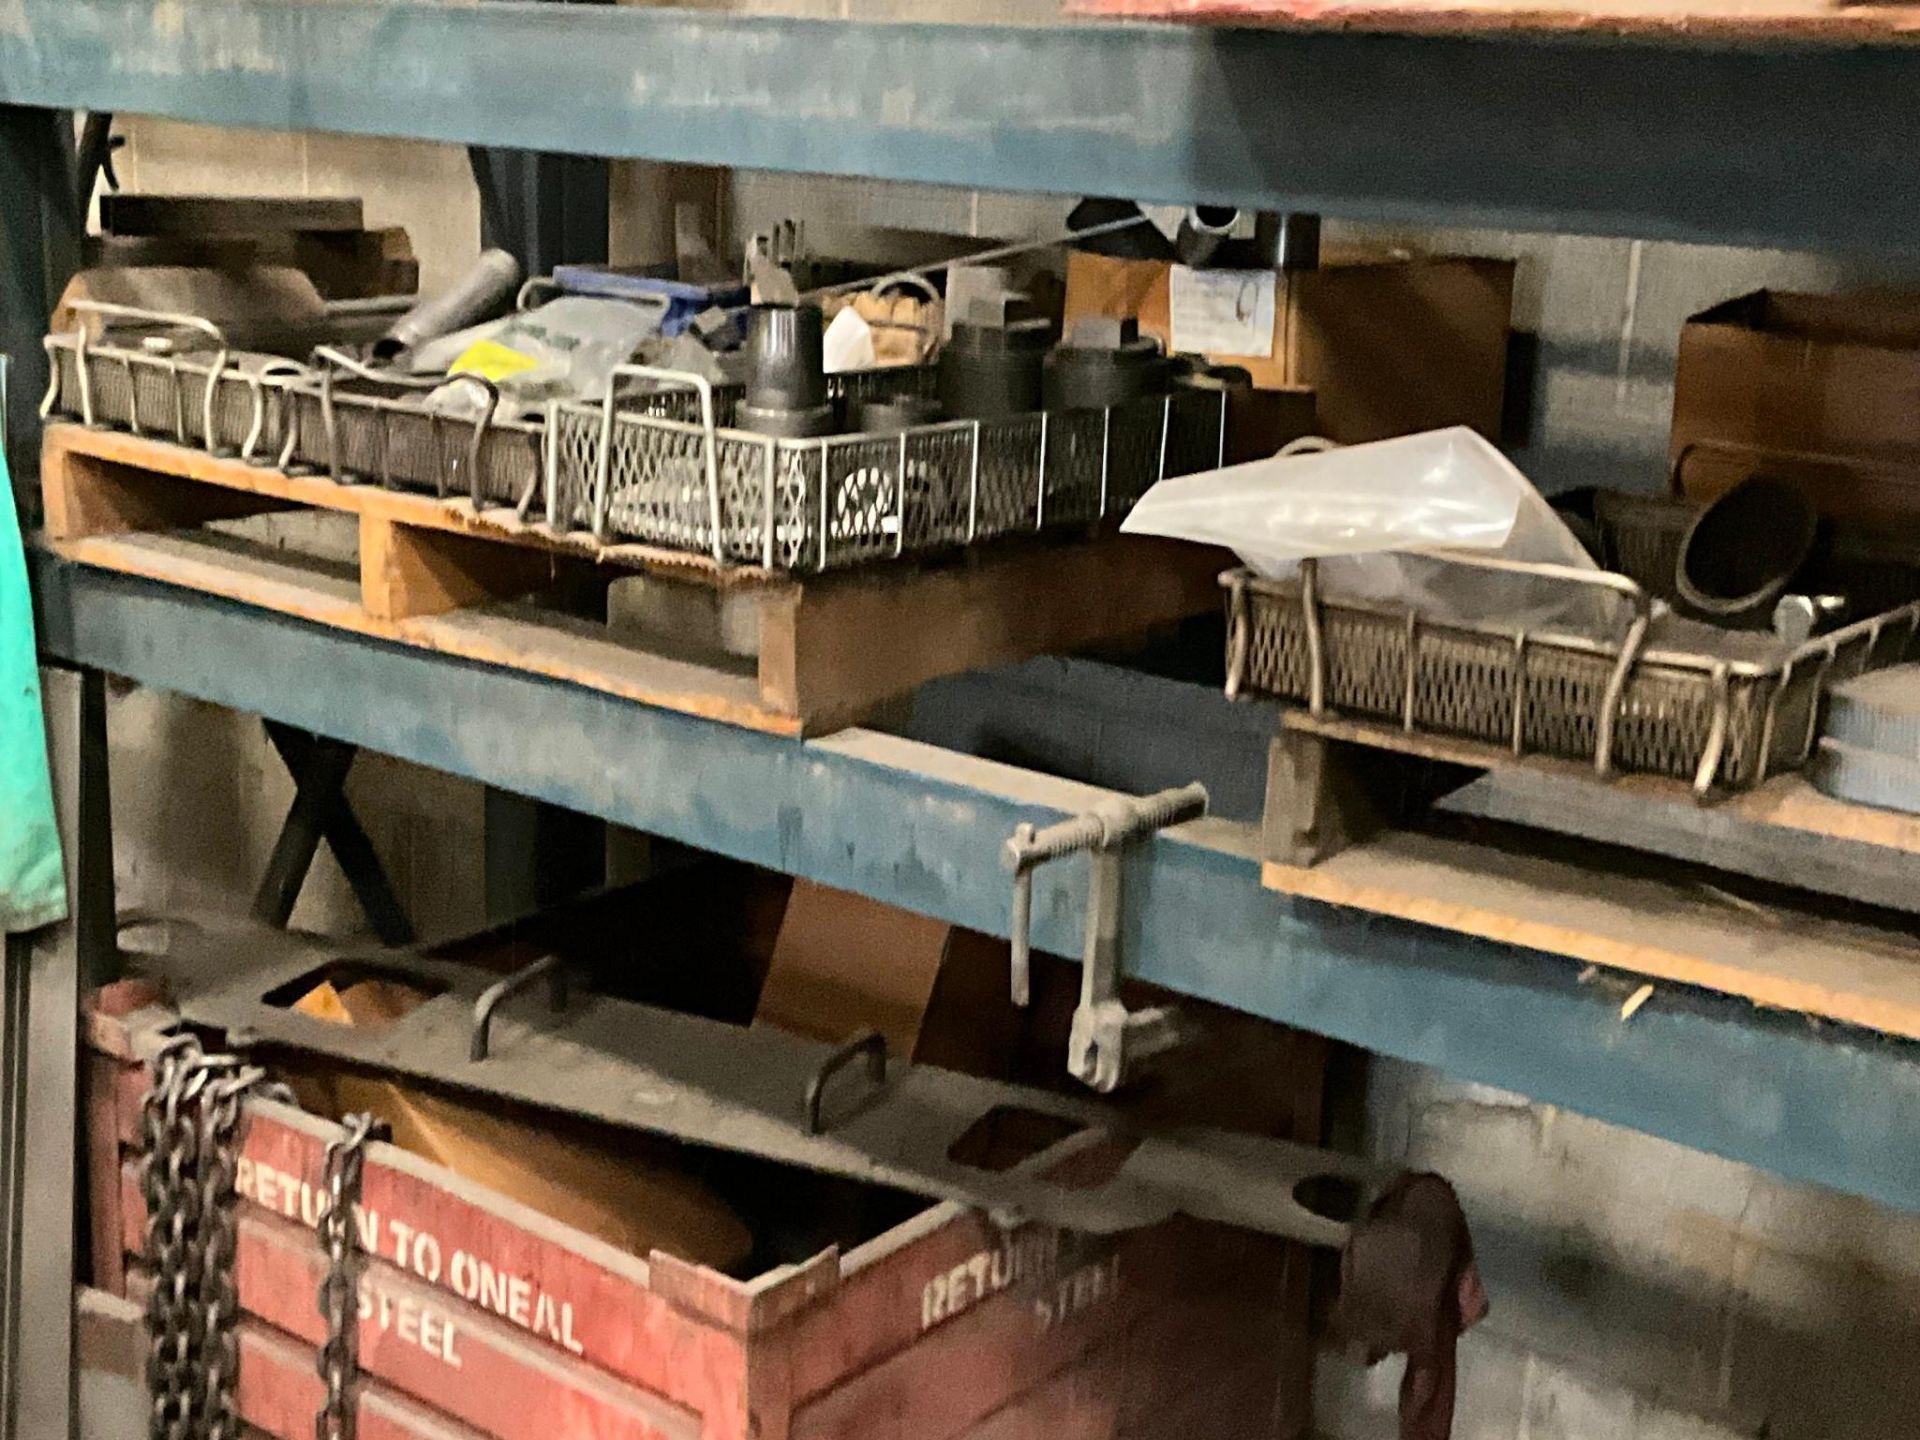 CONTENTS OF PALLET RACKING, WELDERS, MACHINE PARTS, RAW MATERIAL - Image 23 of 28